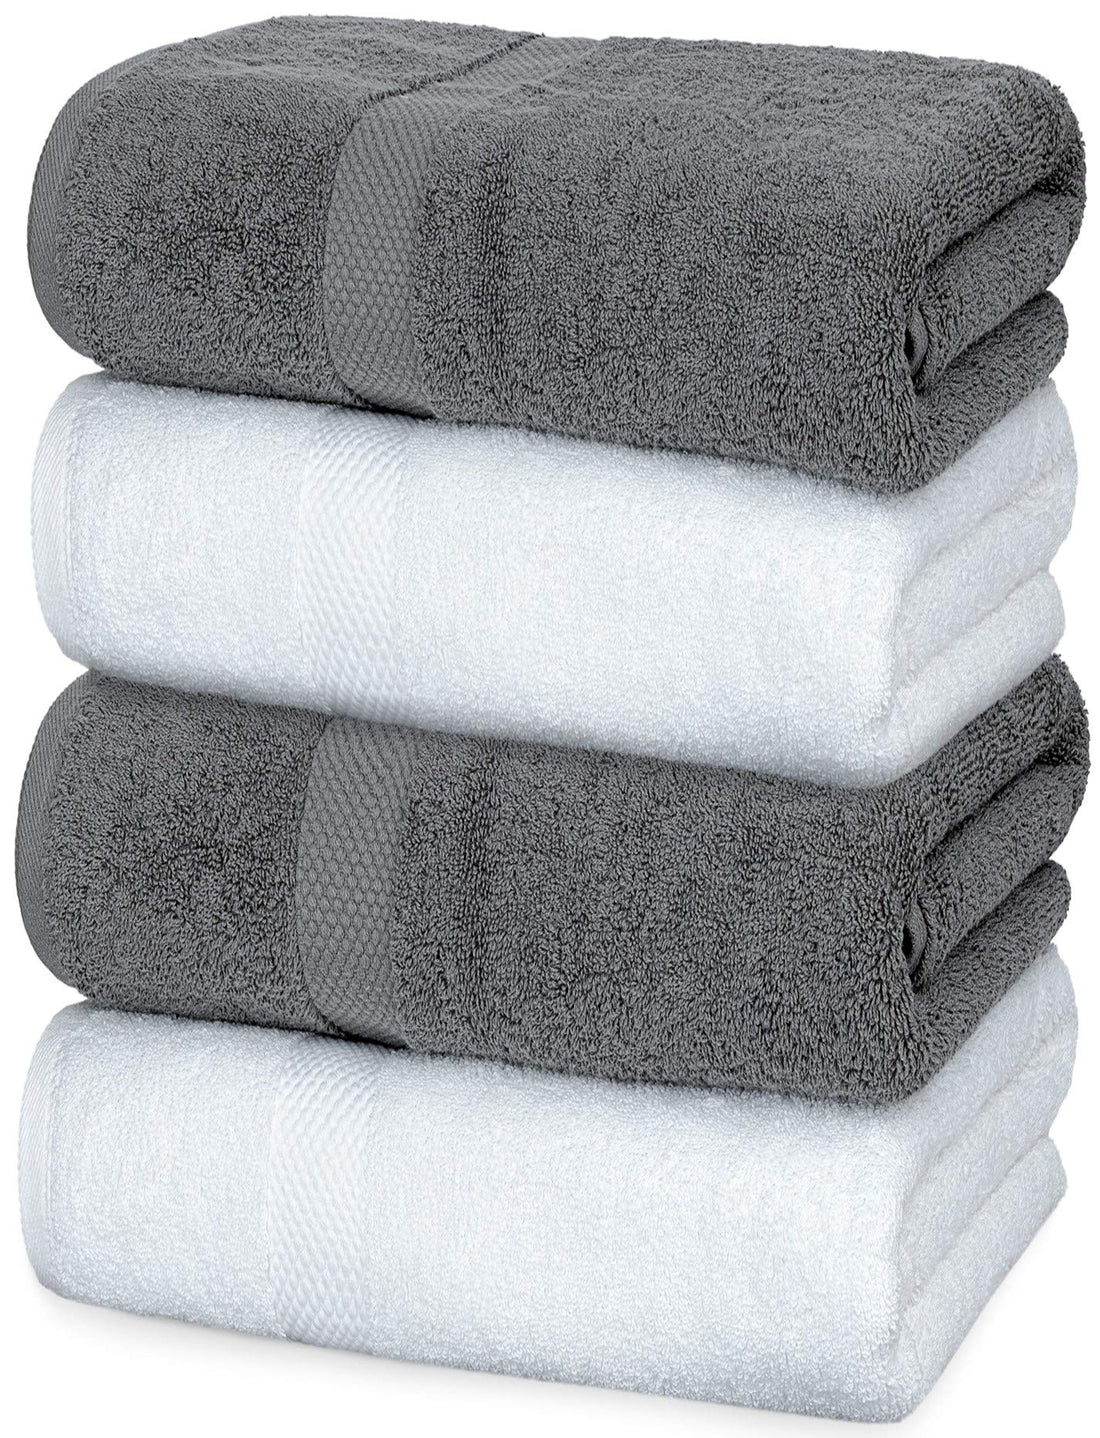 Luxury Classical Bath Towels Large -27x55 Inch Premium Soft Cotton ,Quick-Dry,Thick and Absorbent Hotel Bathroom Towel